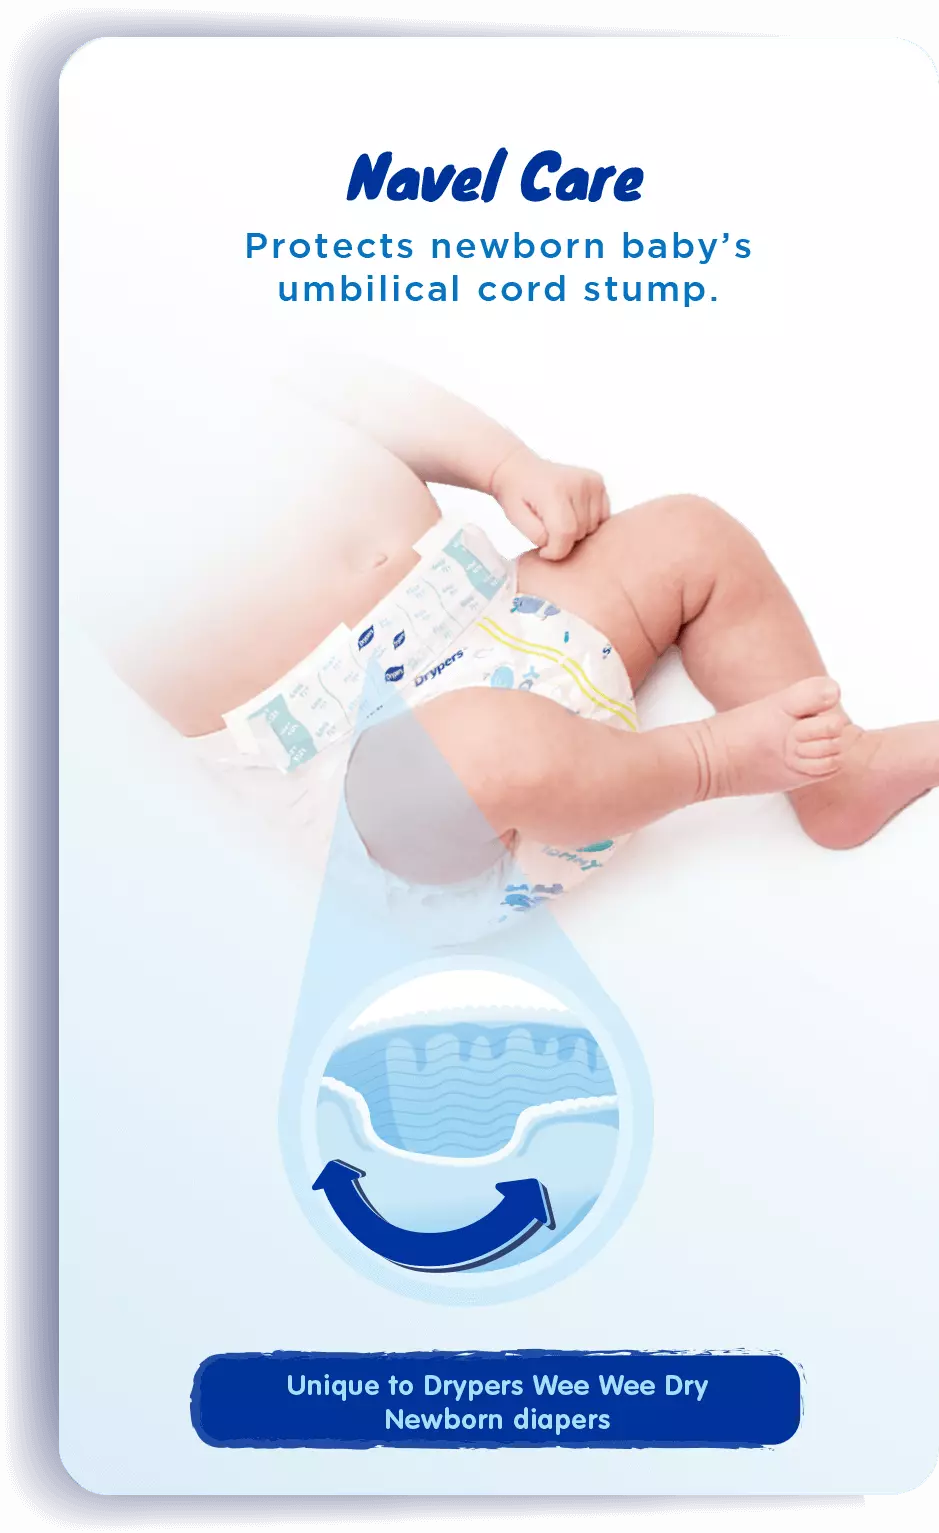 Navel Care: Protect newborn baby's umbilical cord stump. | Unique to Drypers Wee Wee Dry Newborn diapers